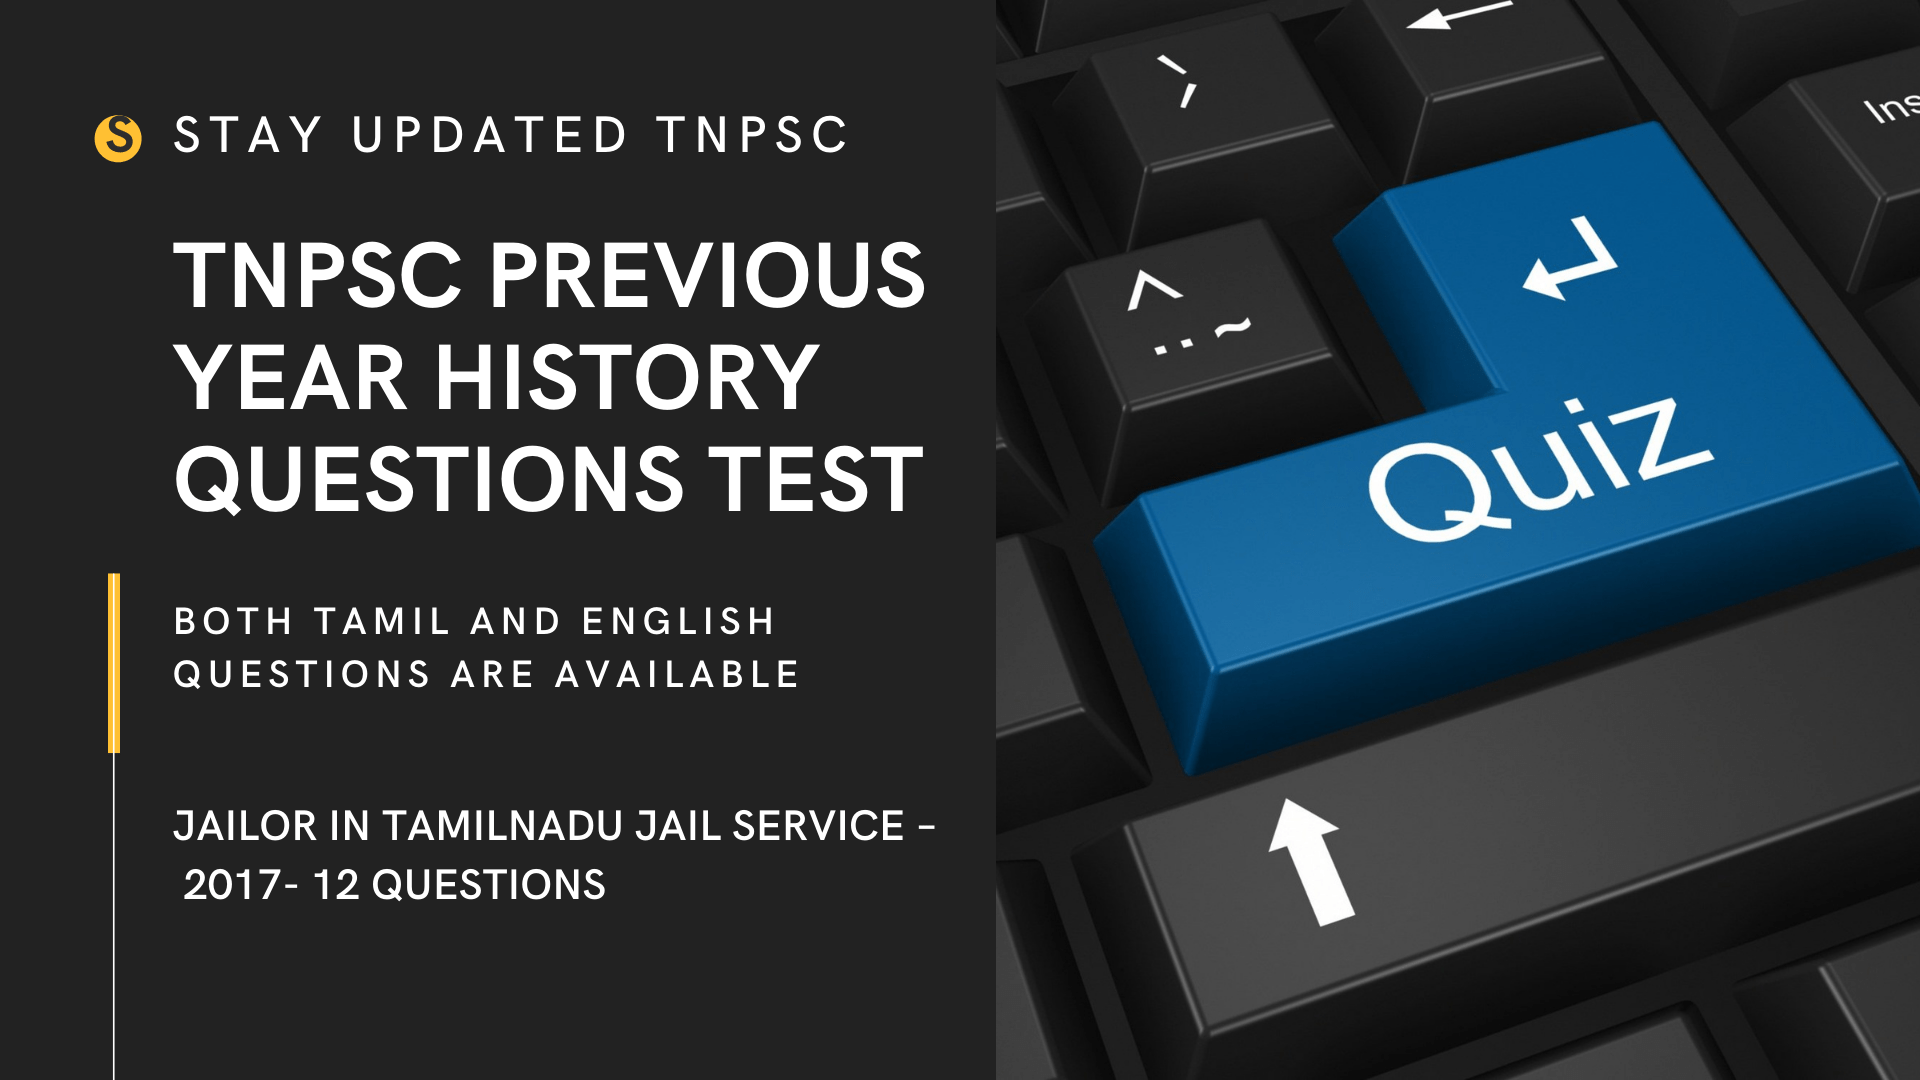 HISTORY QUESTIONS FROM TNPSC PREVIOUS YEAR QUESTION PAPER IN BOTH TAMIL AND ENGLISH JAILOR IN TAMILNADU JAIL SERVICE – 2017